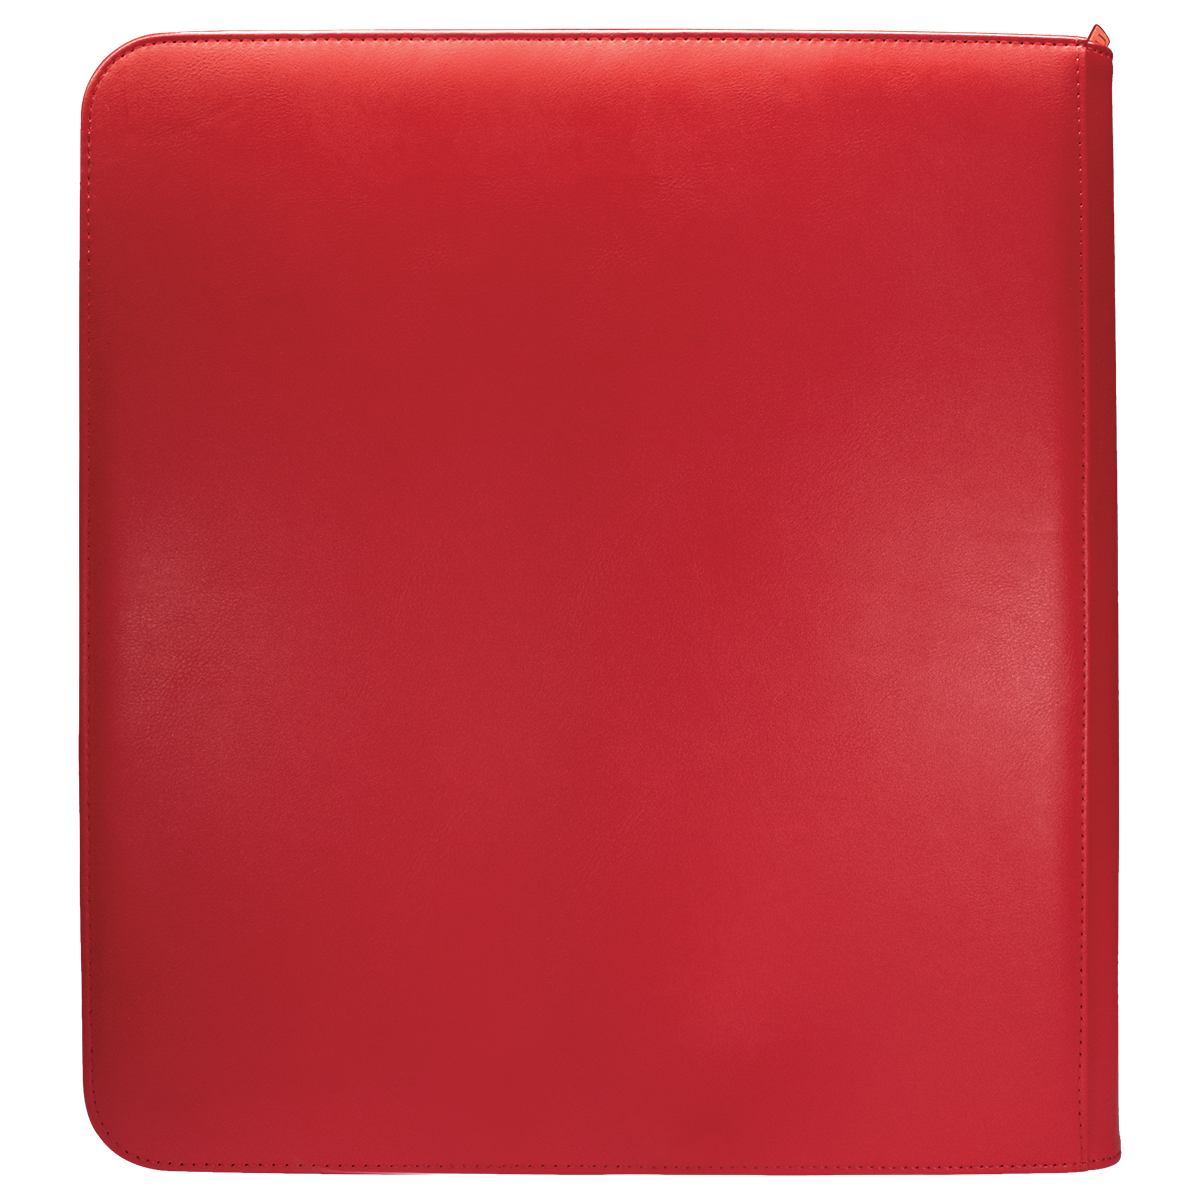 Vivid 12-Pocket Zippered PRO-Binder: Red - Local Pickup Only